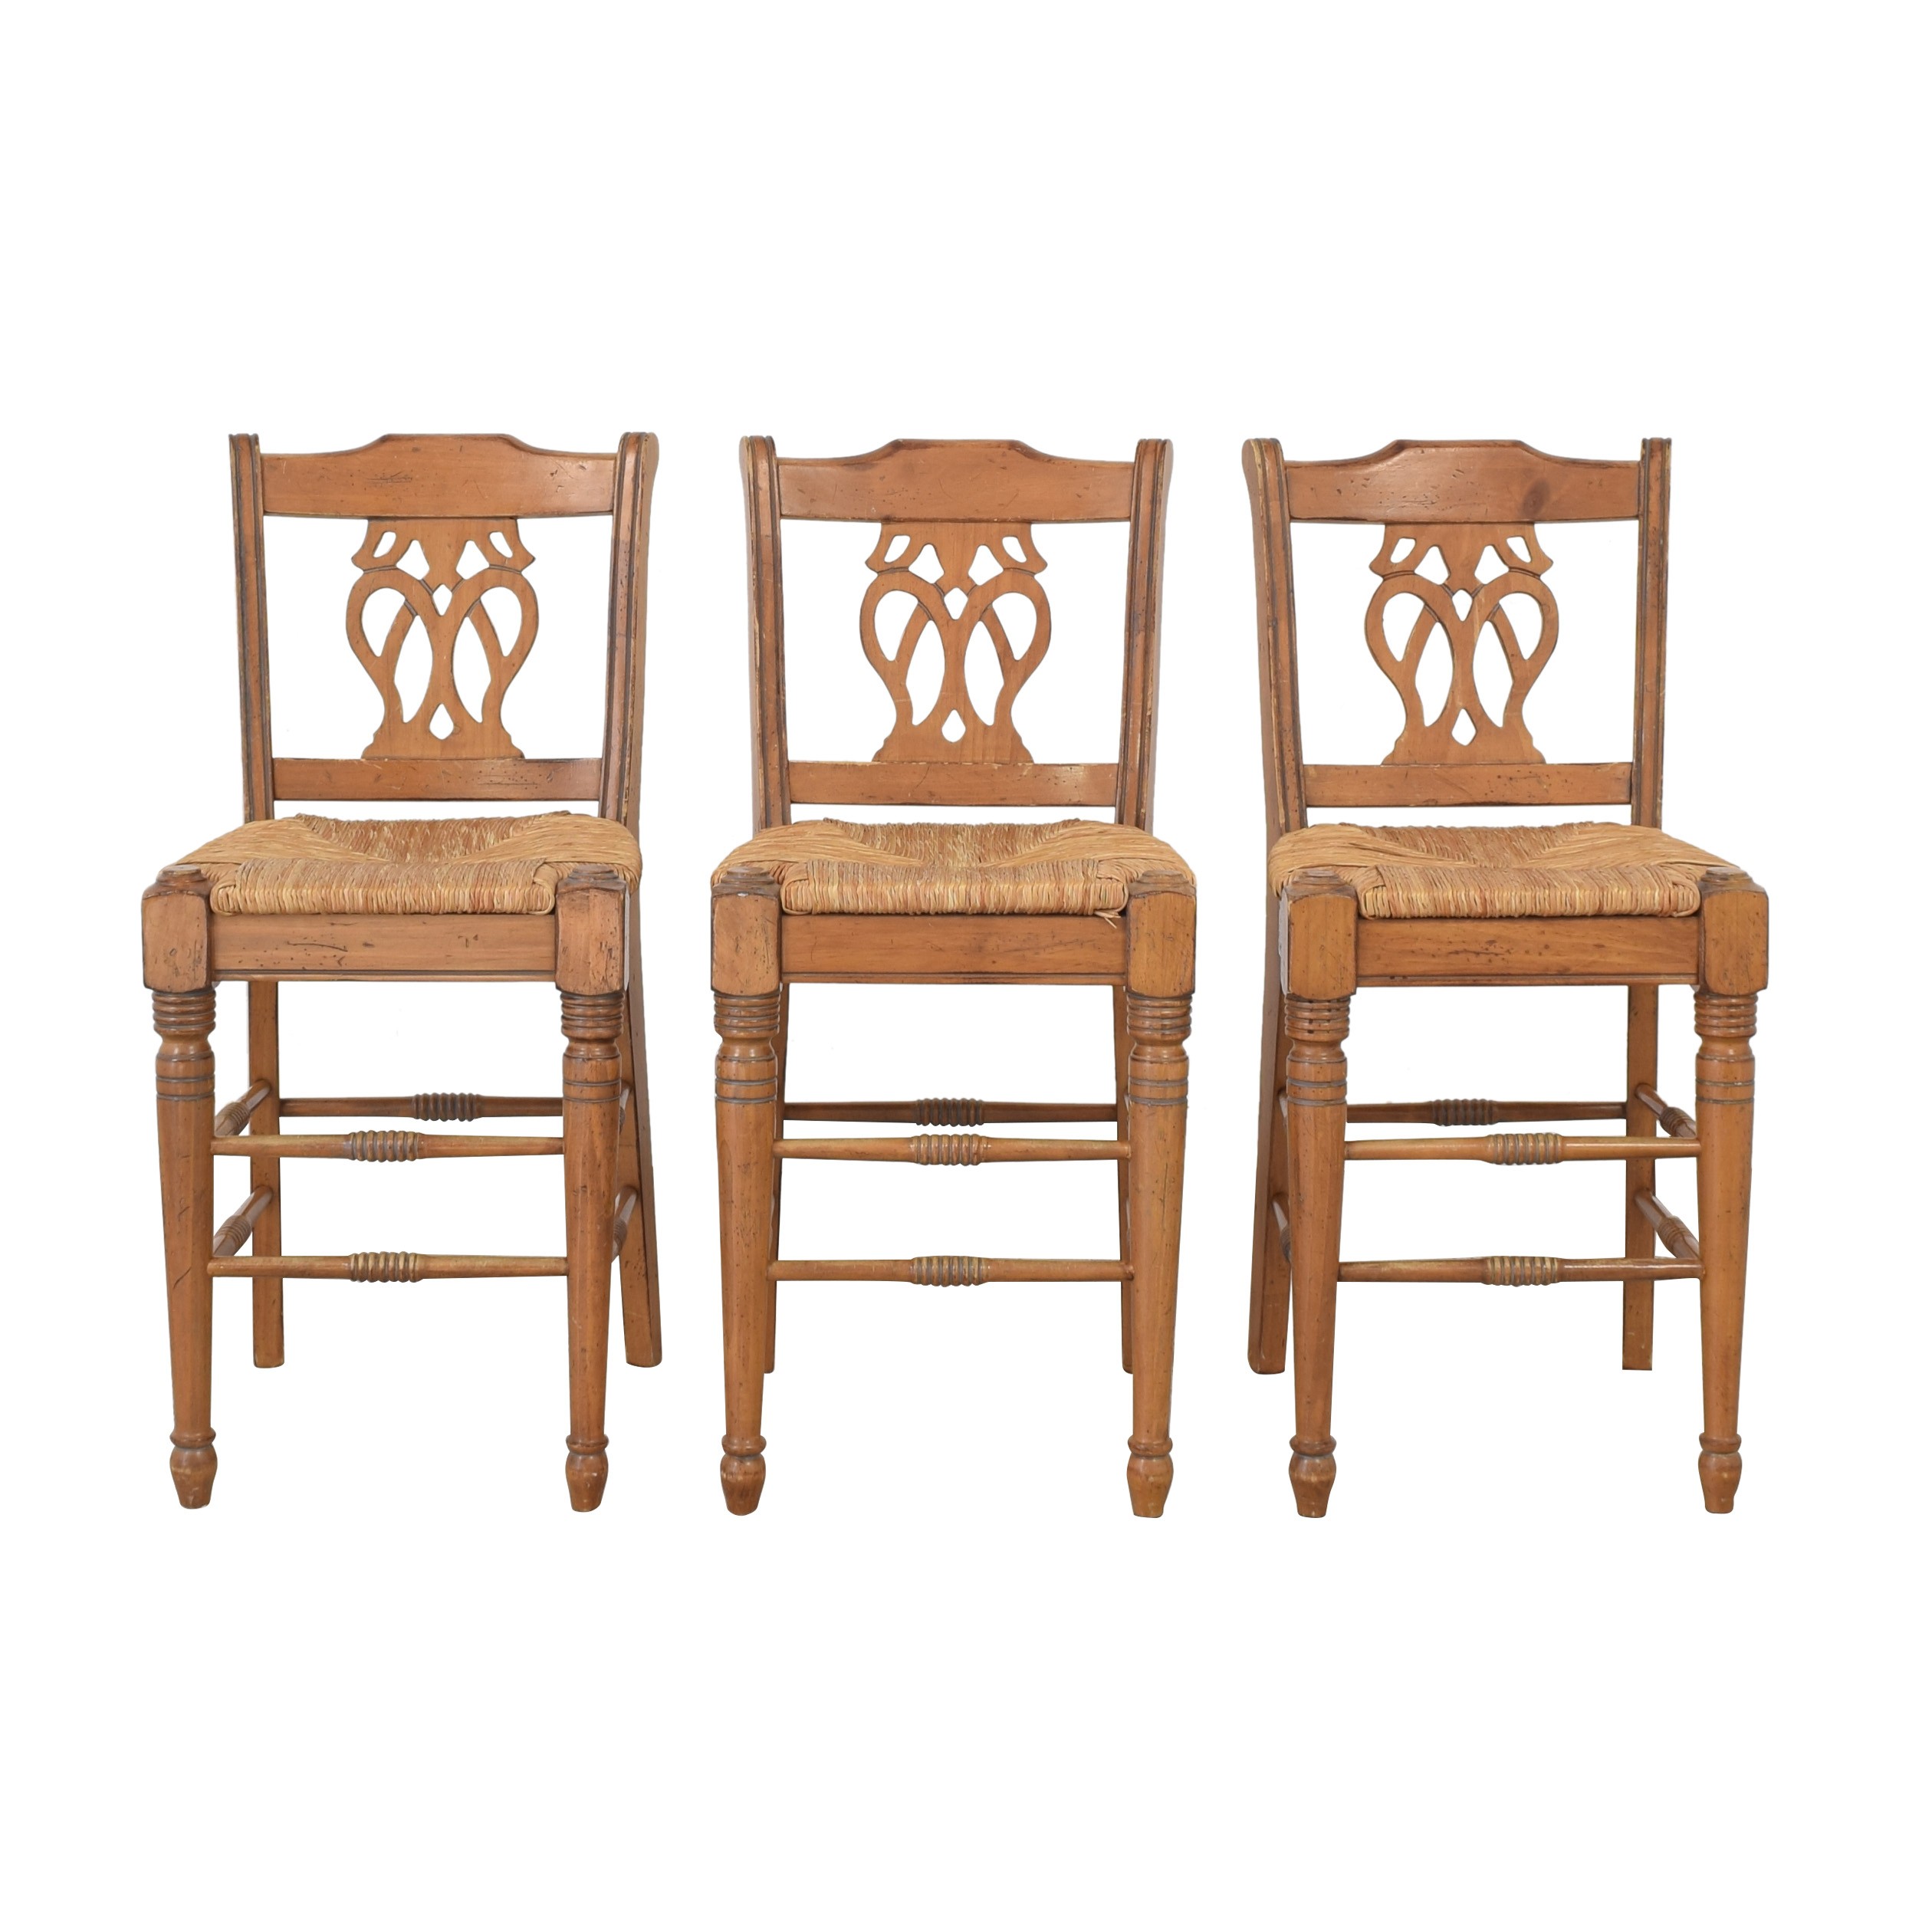 85 off counter height rush seat bar stools chairs 3